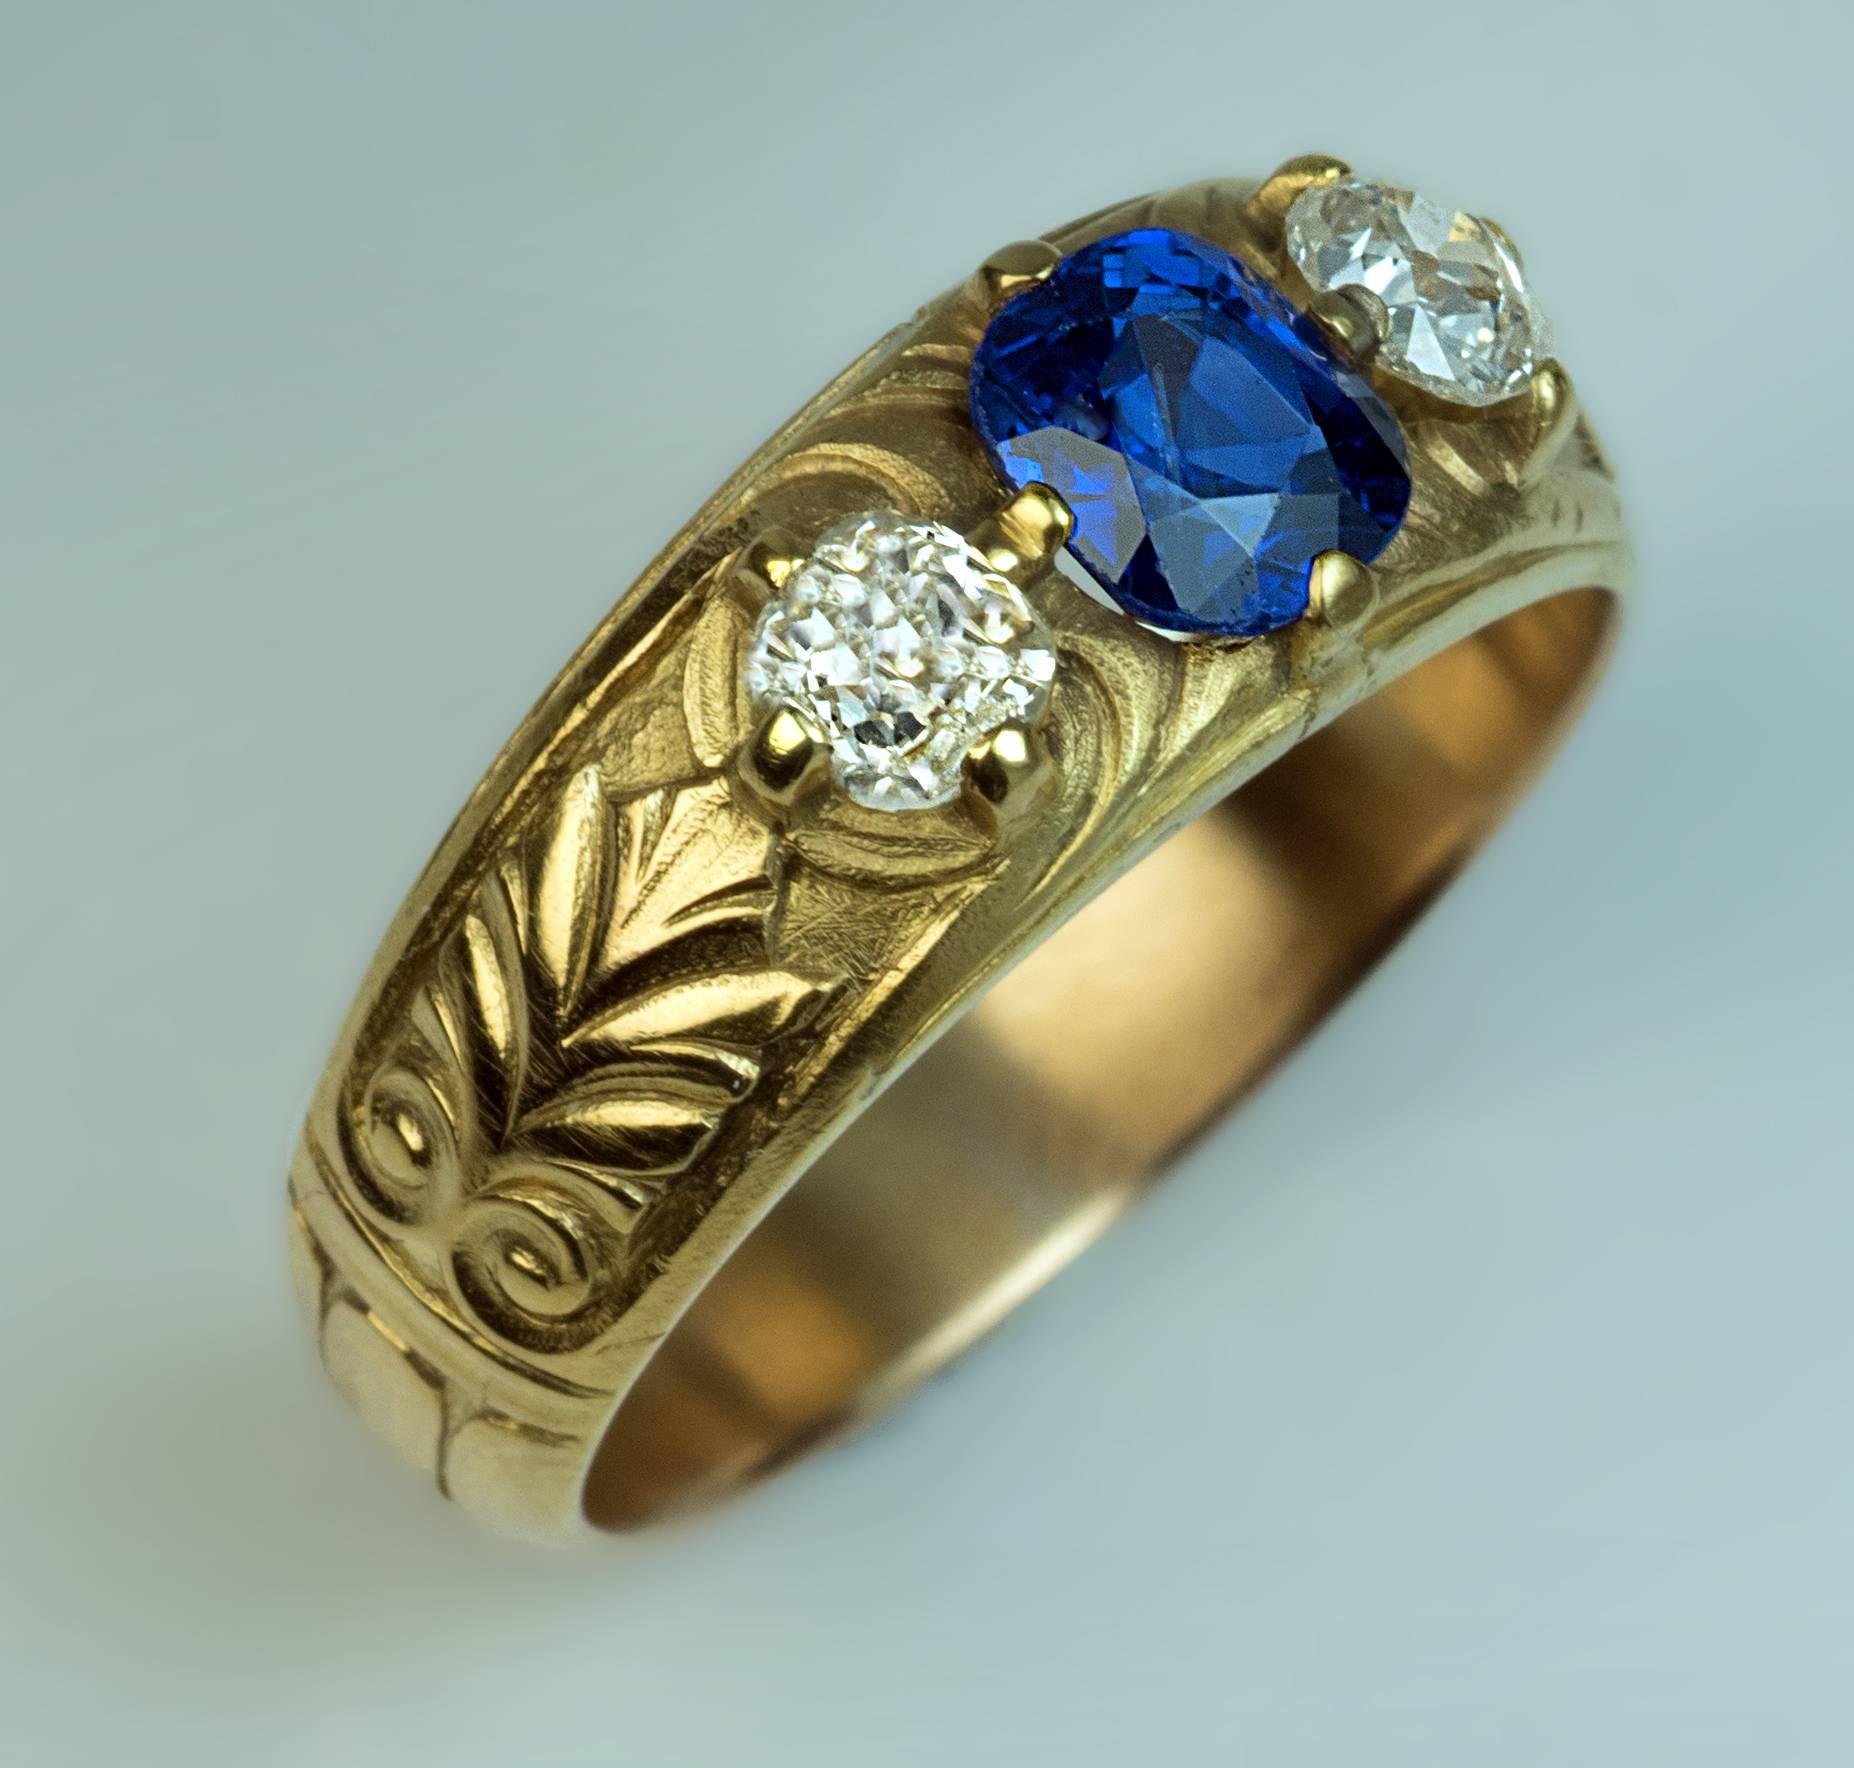 made in Moscow between 1908 and 1917

14K gold ring centered with a natural unheated sapphire of a superb royal blue color (approximately 1 carat) between two old cushion cut diamonds (estimated total weight 0.50 ct), flanked by a pair of carved